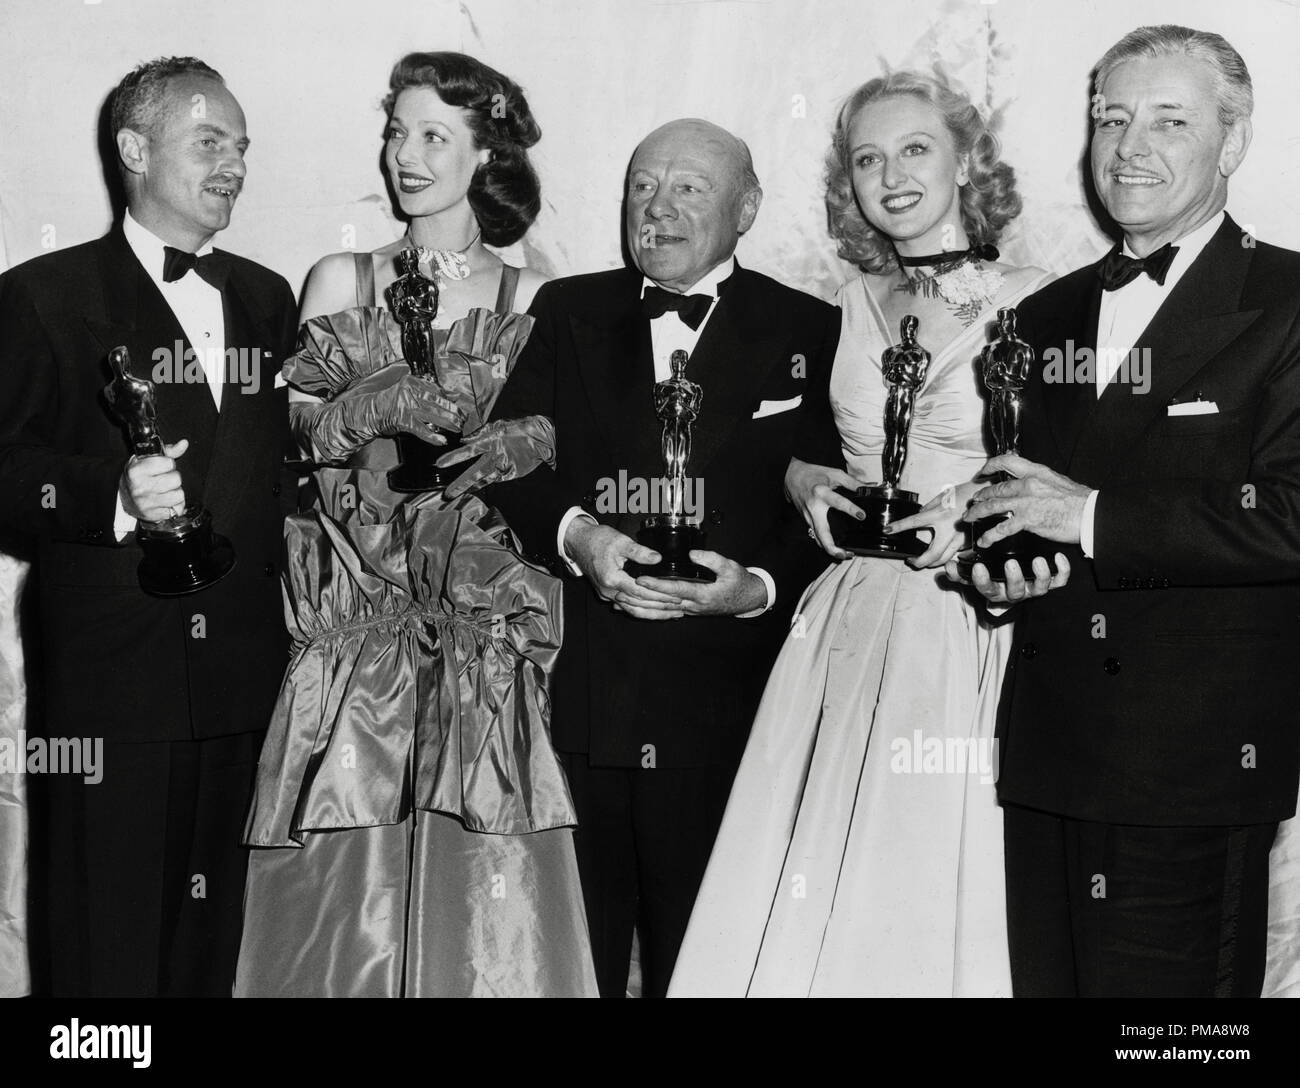 20th Annual Academy Aawrds, Best Producer Darryl Zanuck, Best Actress Loretta Young, Best Supporting Actor Edmund Gwenn, Best Supporting Actress Celeste Holm and Best Actor Ronald Colman, 1948 File Reference # 31955 668THA Stock Photo